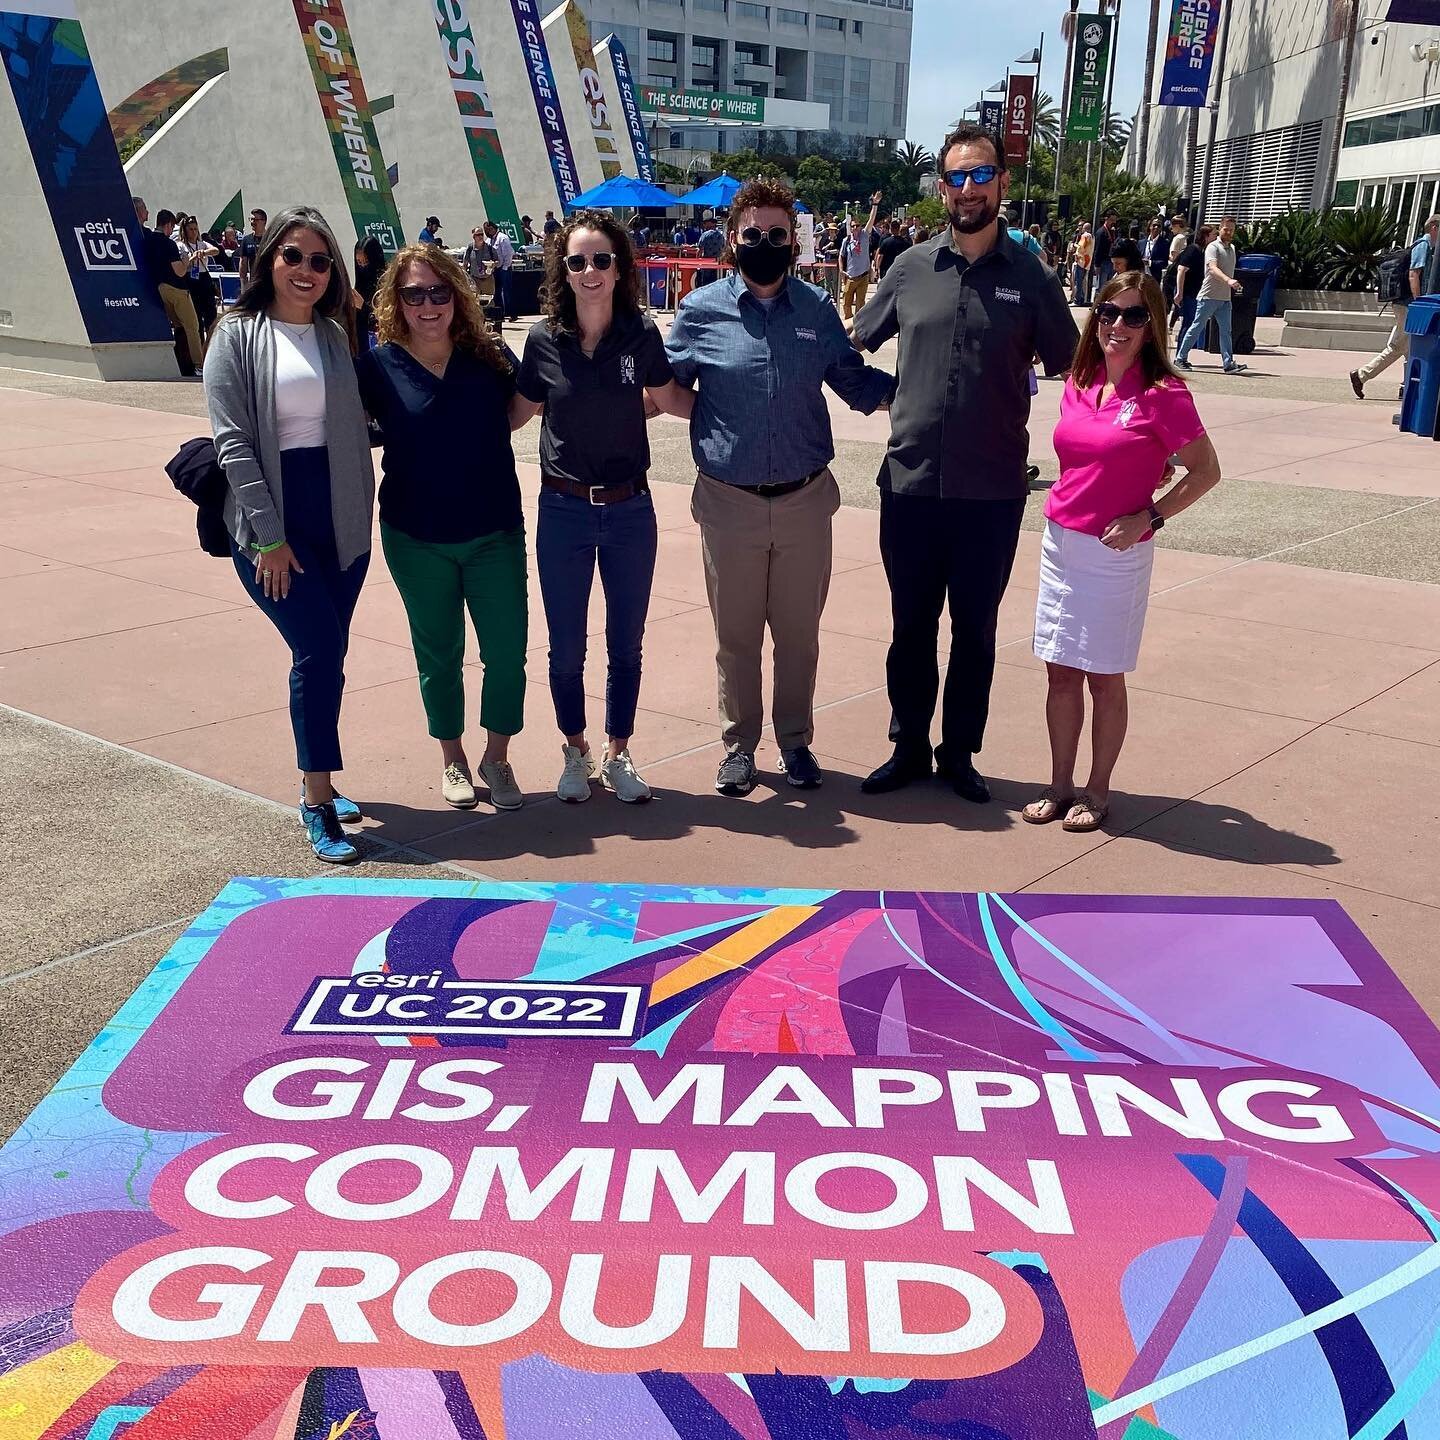 Blue Raster is back in San Diego for the EsriUC ☀️Look for us at the Map Gallery Reception this afternoon and on the Expo floor at our booth 2410 all week! #esriuc #esriuc2022 #gis #esrigram